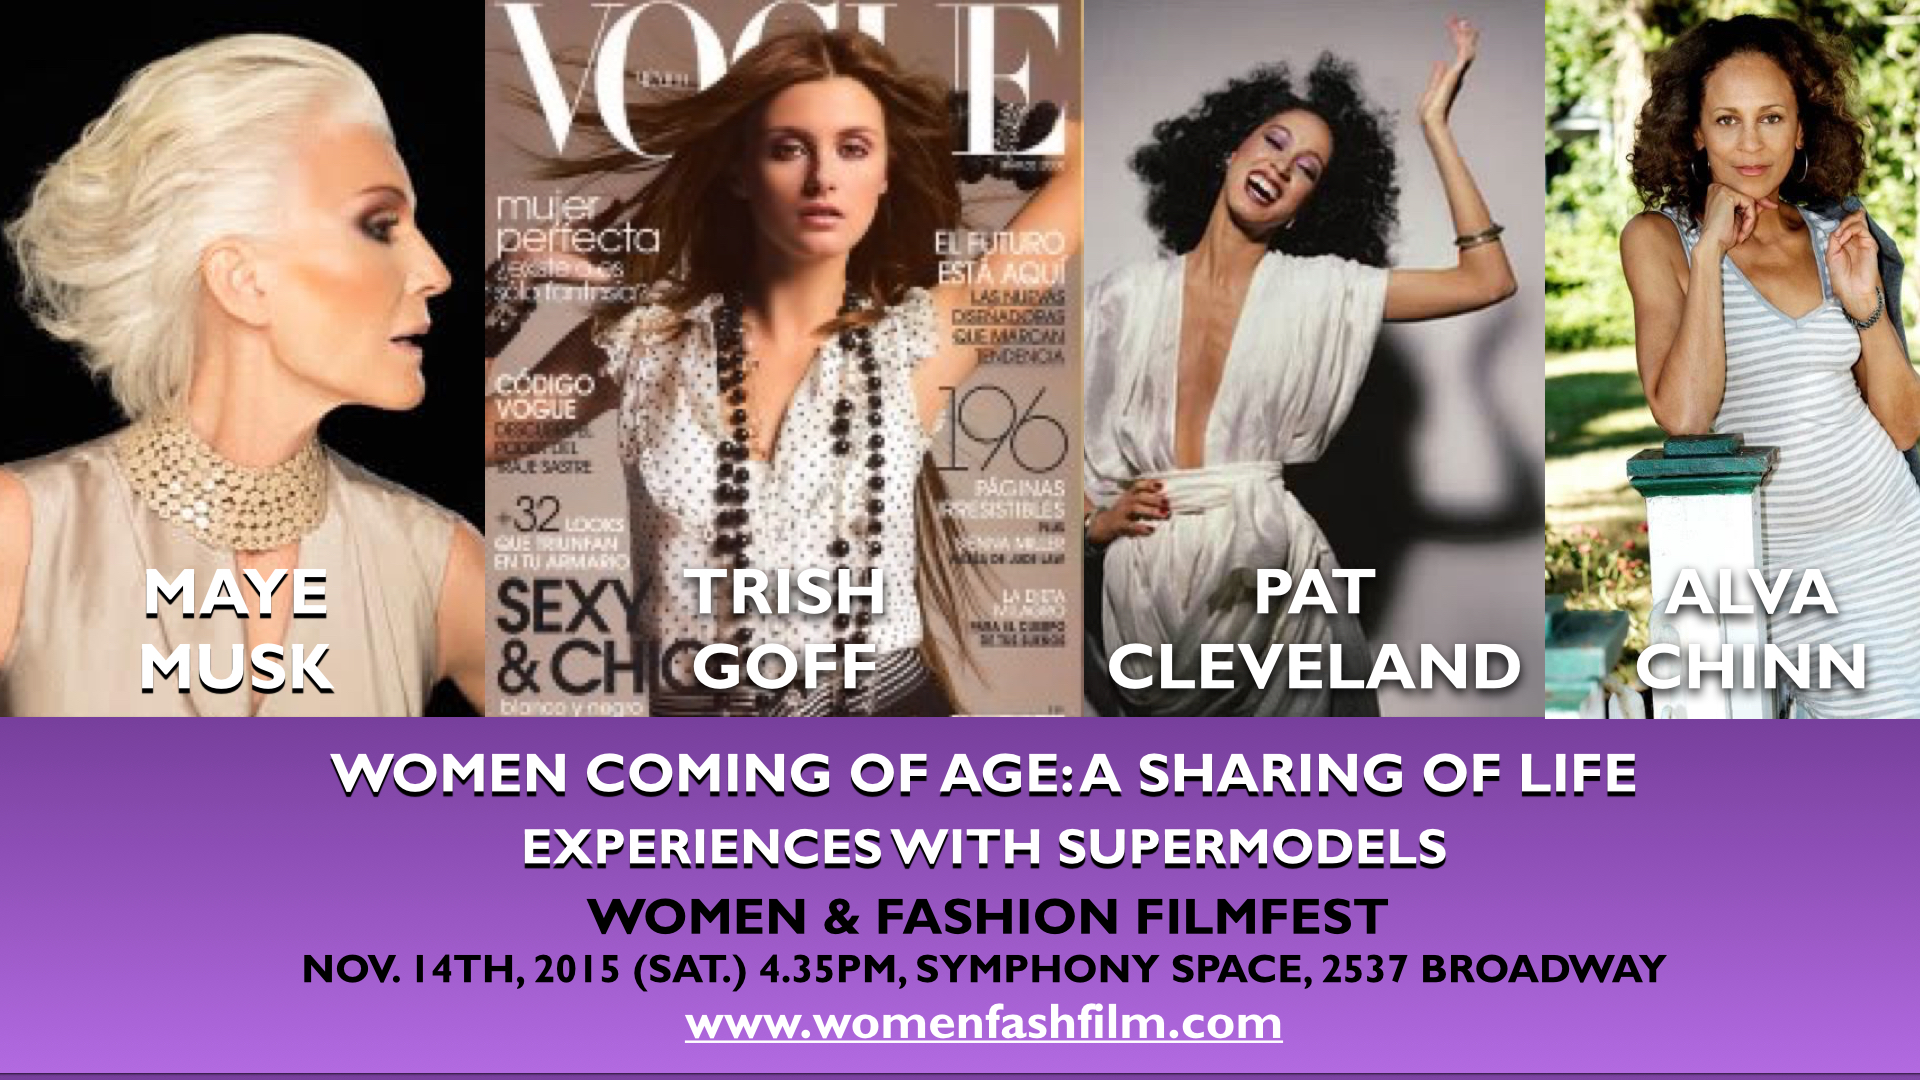 Women Coming of Age: A Sharing of Life Experiences with Supermodels